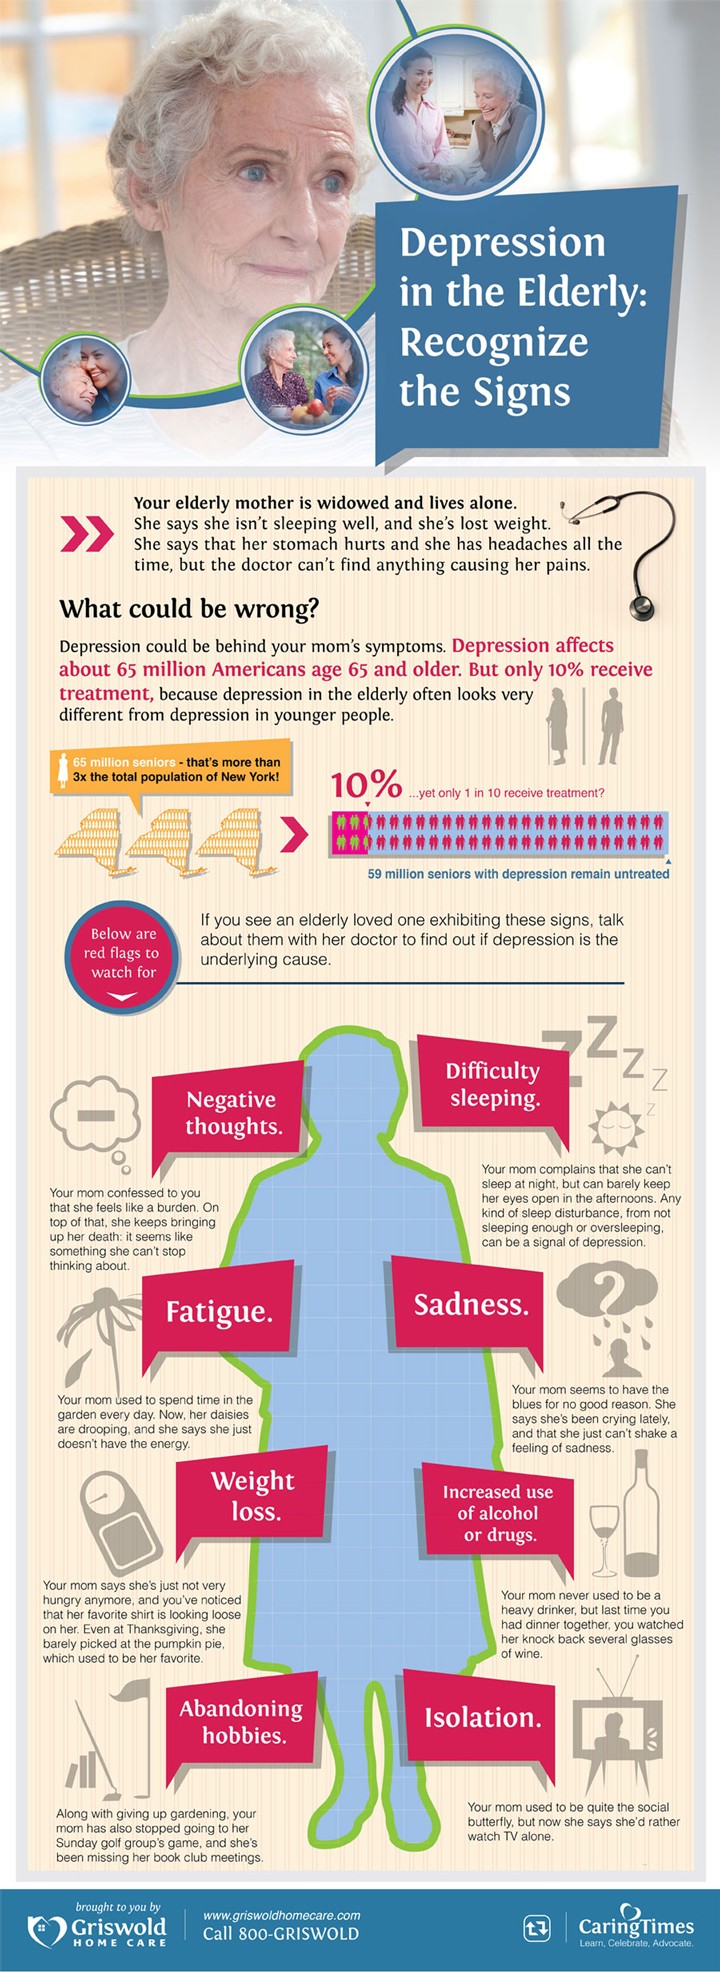 Depression in the Elderly Infographic